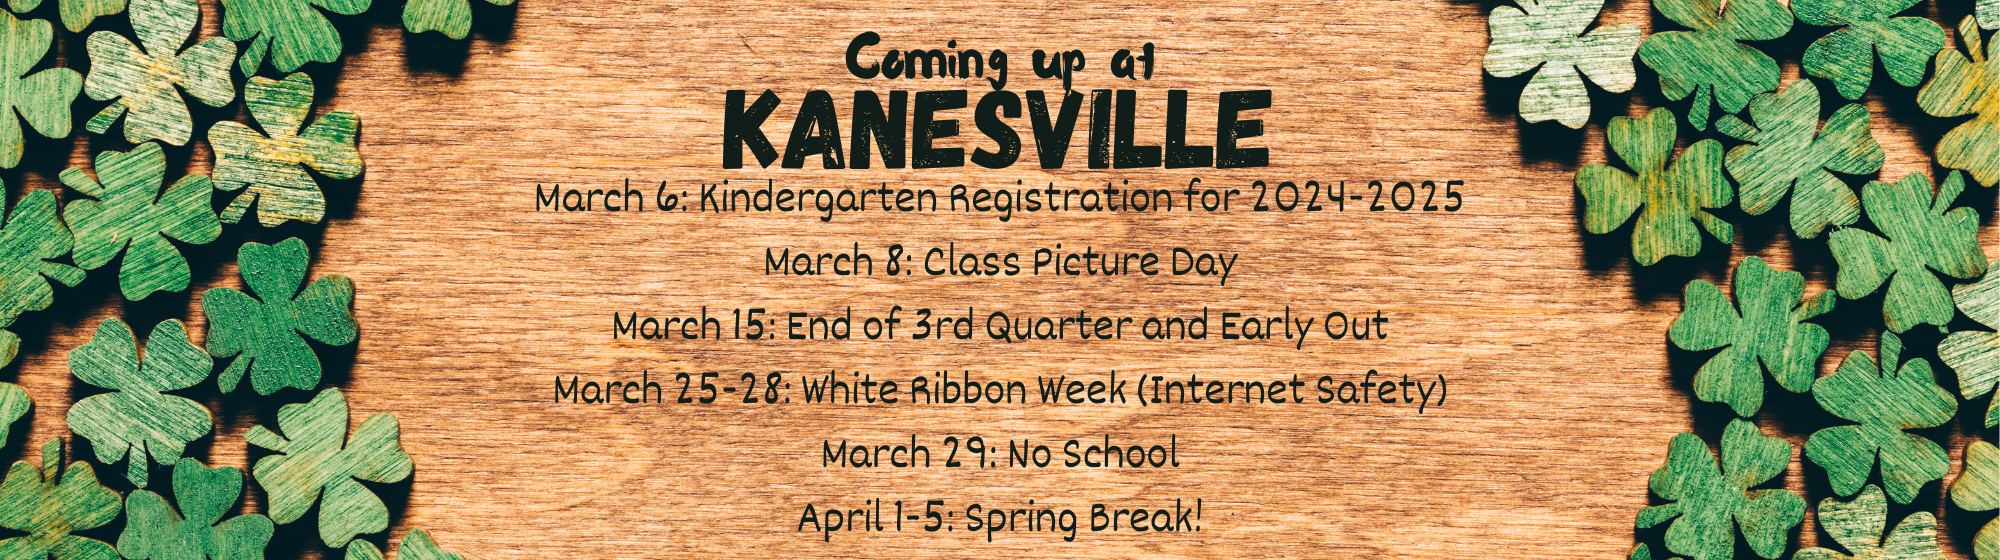 Coming up at Kanesville: March 6: Kindergarten Registration for 2024-2025 March 8: Class Picture Day March 15: End of 3rd Quarter and Early Out March 25-28: White Ribbon Week (Internet Safety) March 29: No School April 1-5: Spring Break!